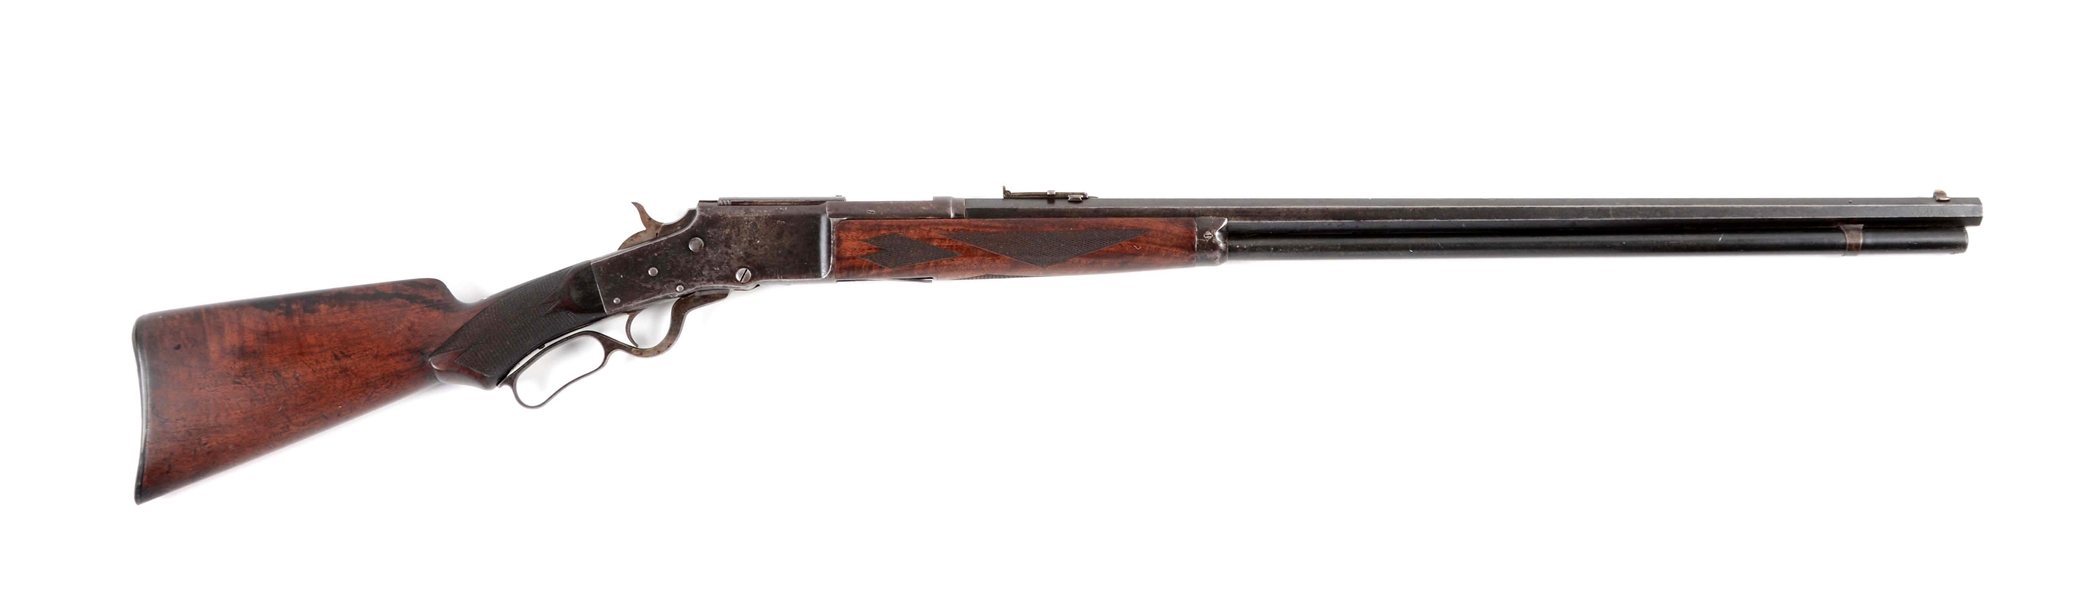 (A^) DELUXE LARGE FRAME BULLARD LEVER ACTION RIFLE.